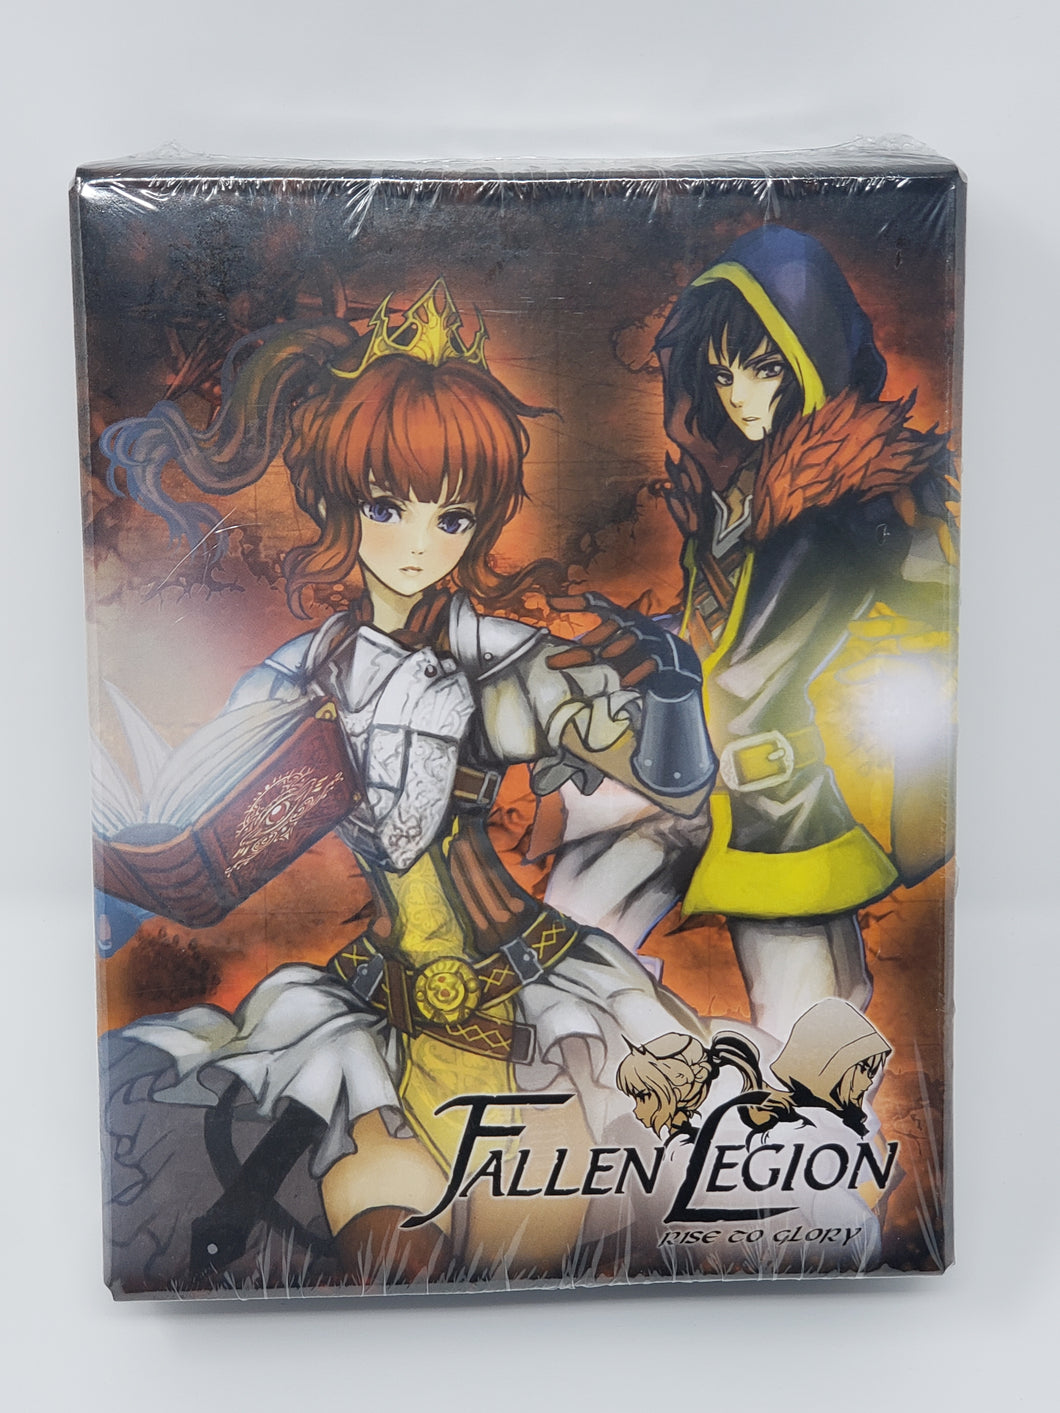 Fallen Legion : Rise to Glory Exemplary Limited Edition [new] - Nintendo Switch